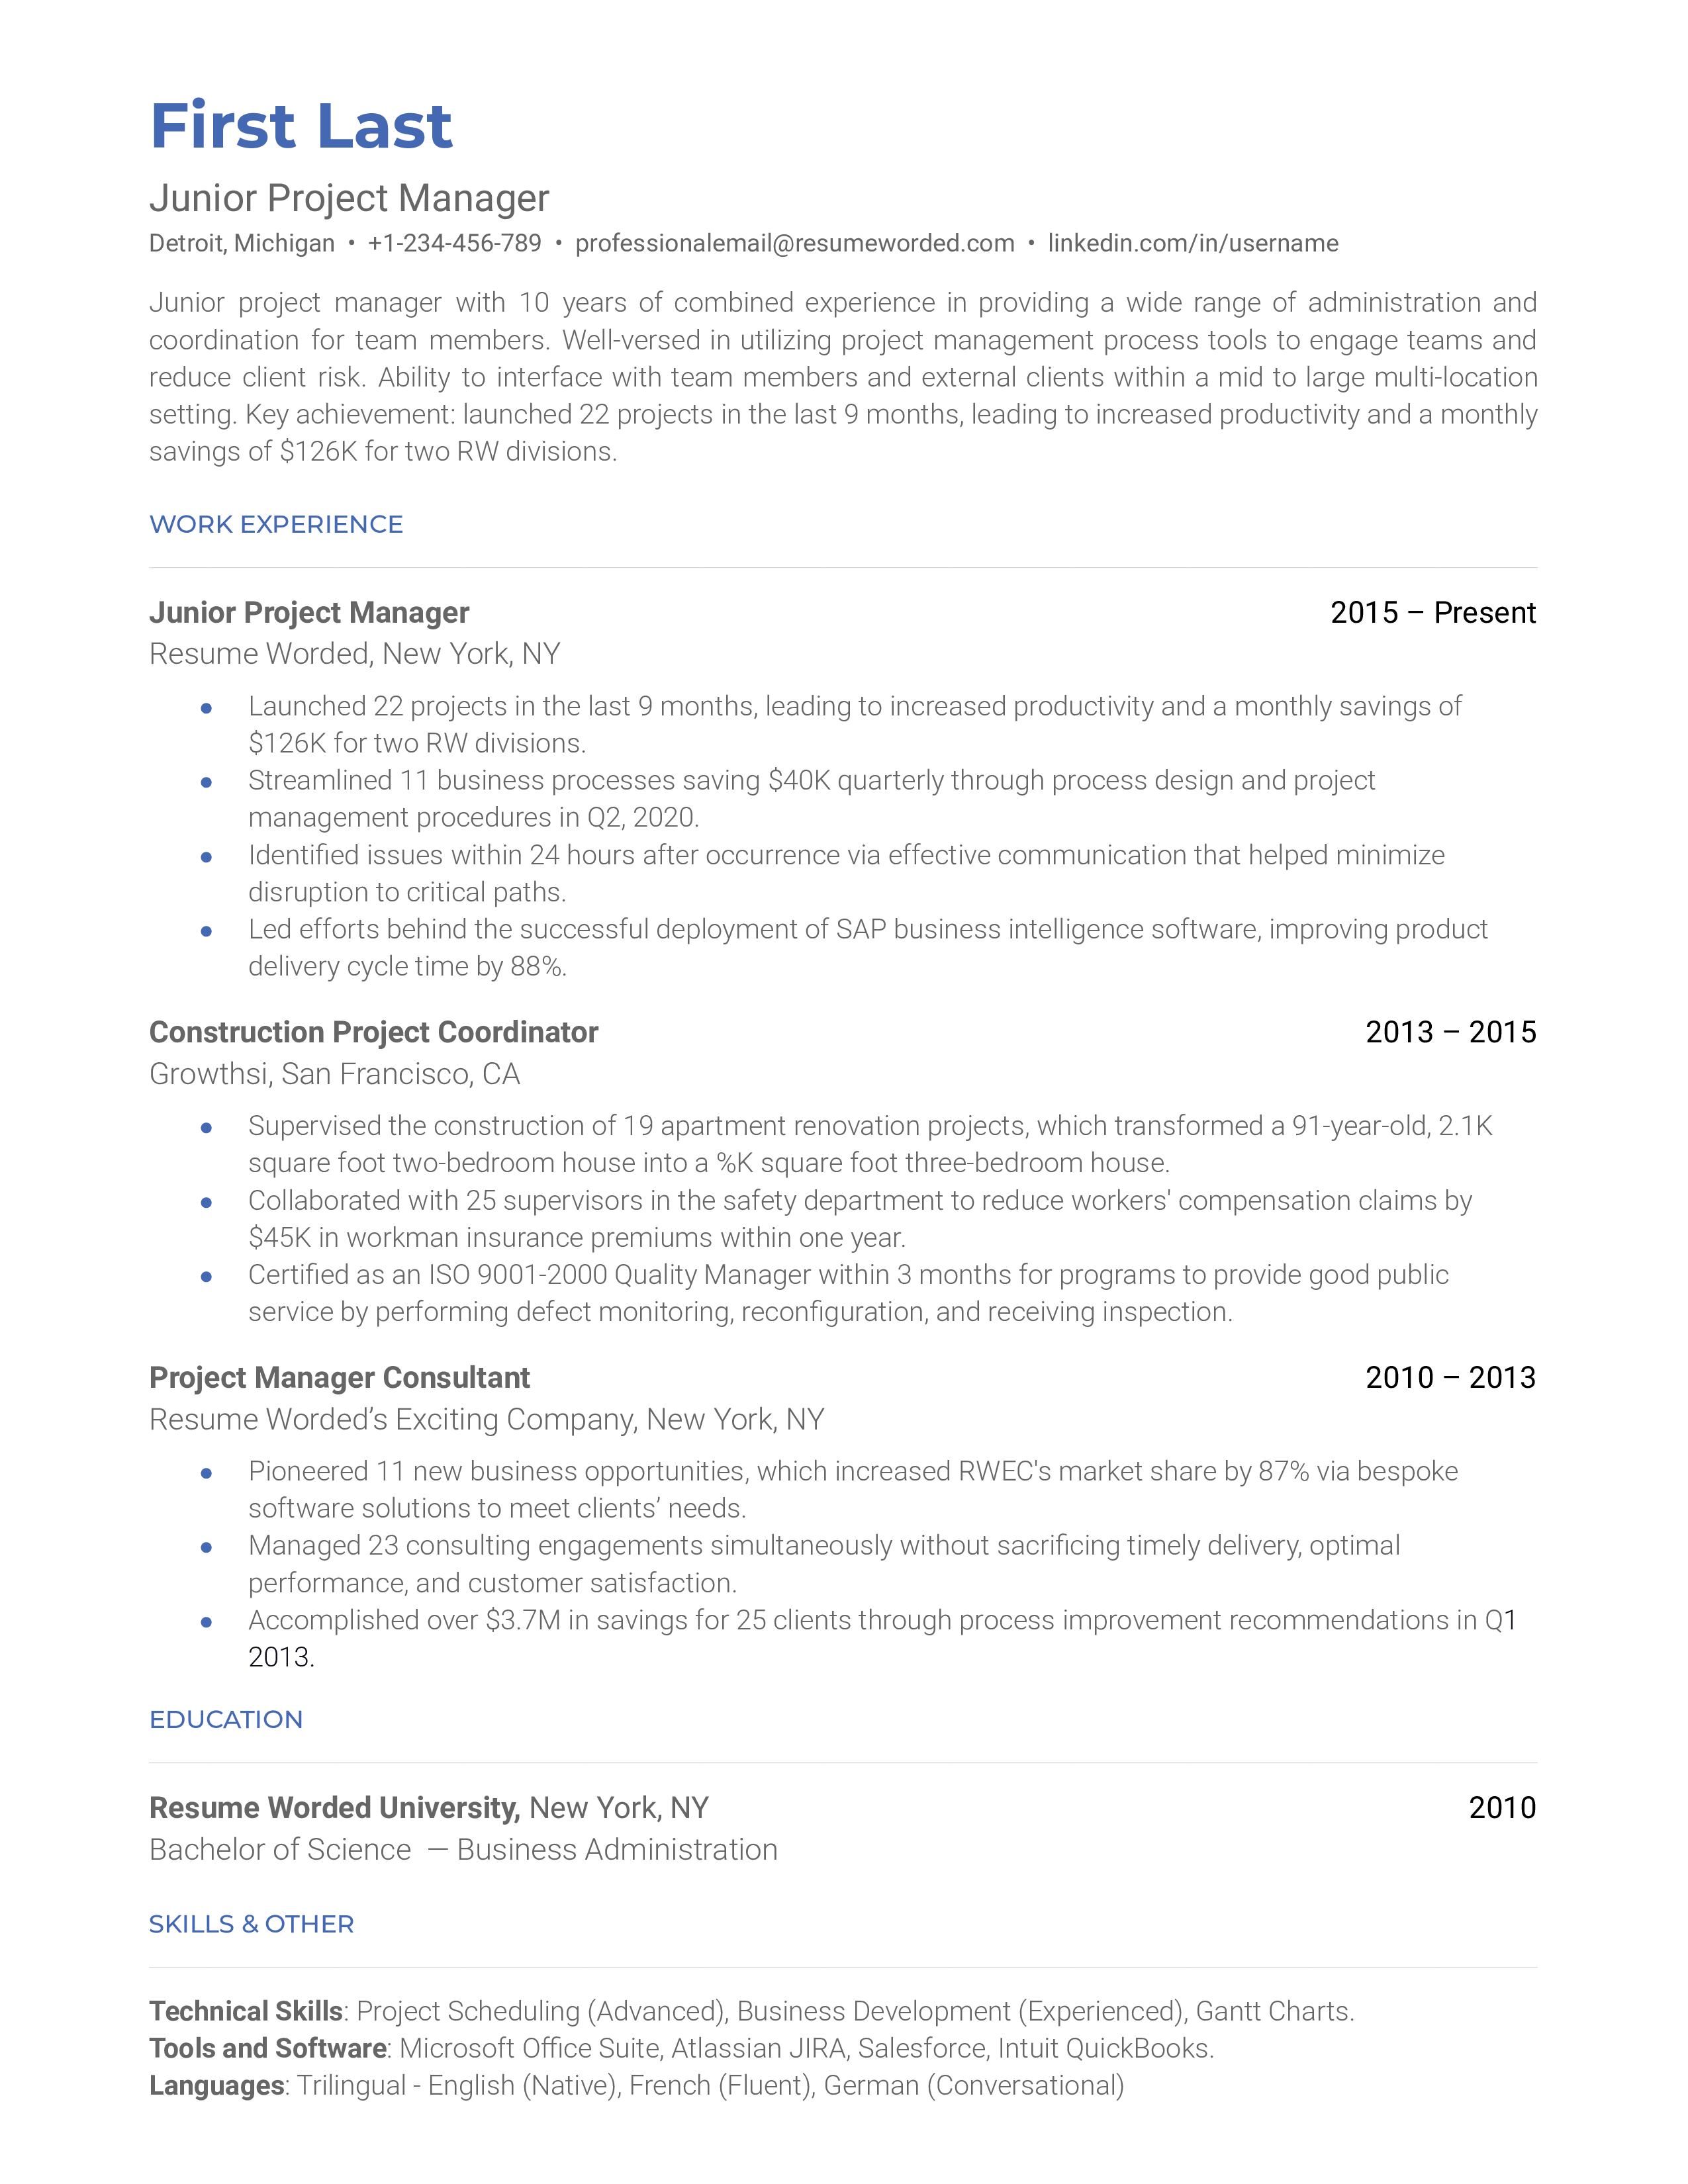 Junior Project Manager Resume Template + Example